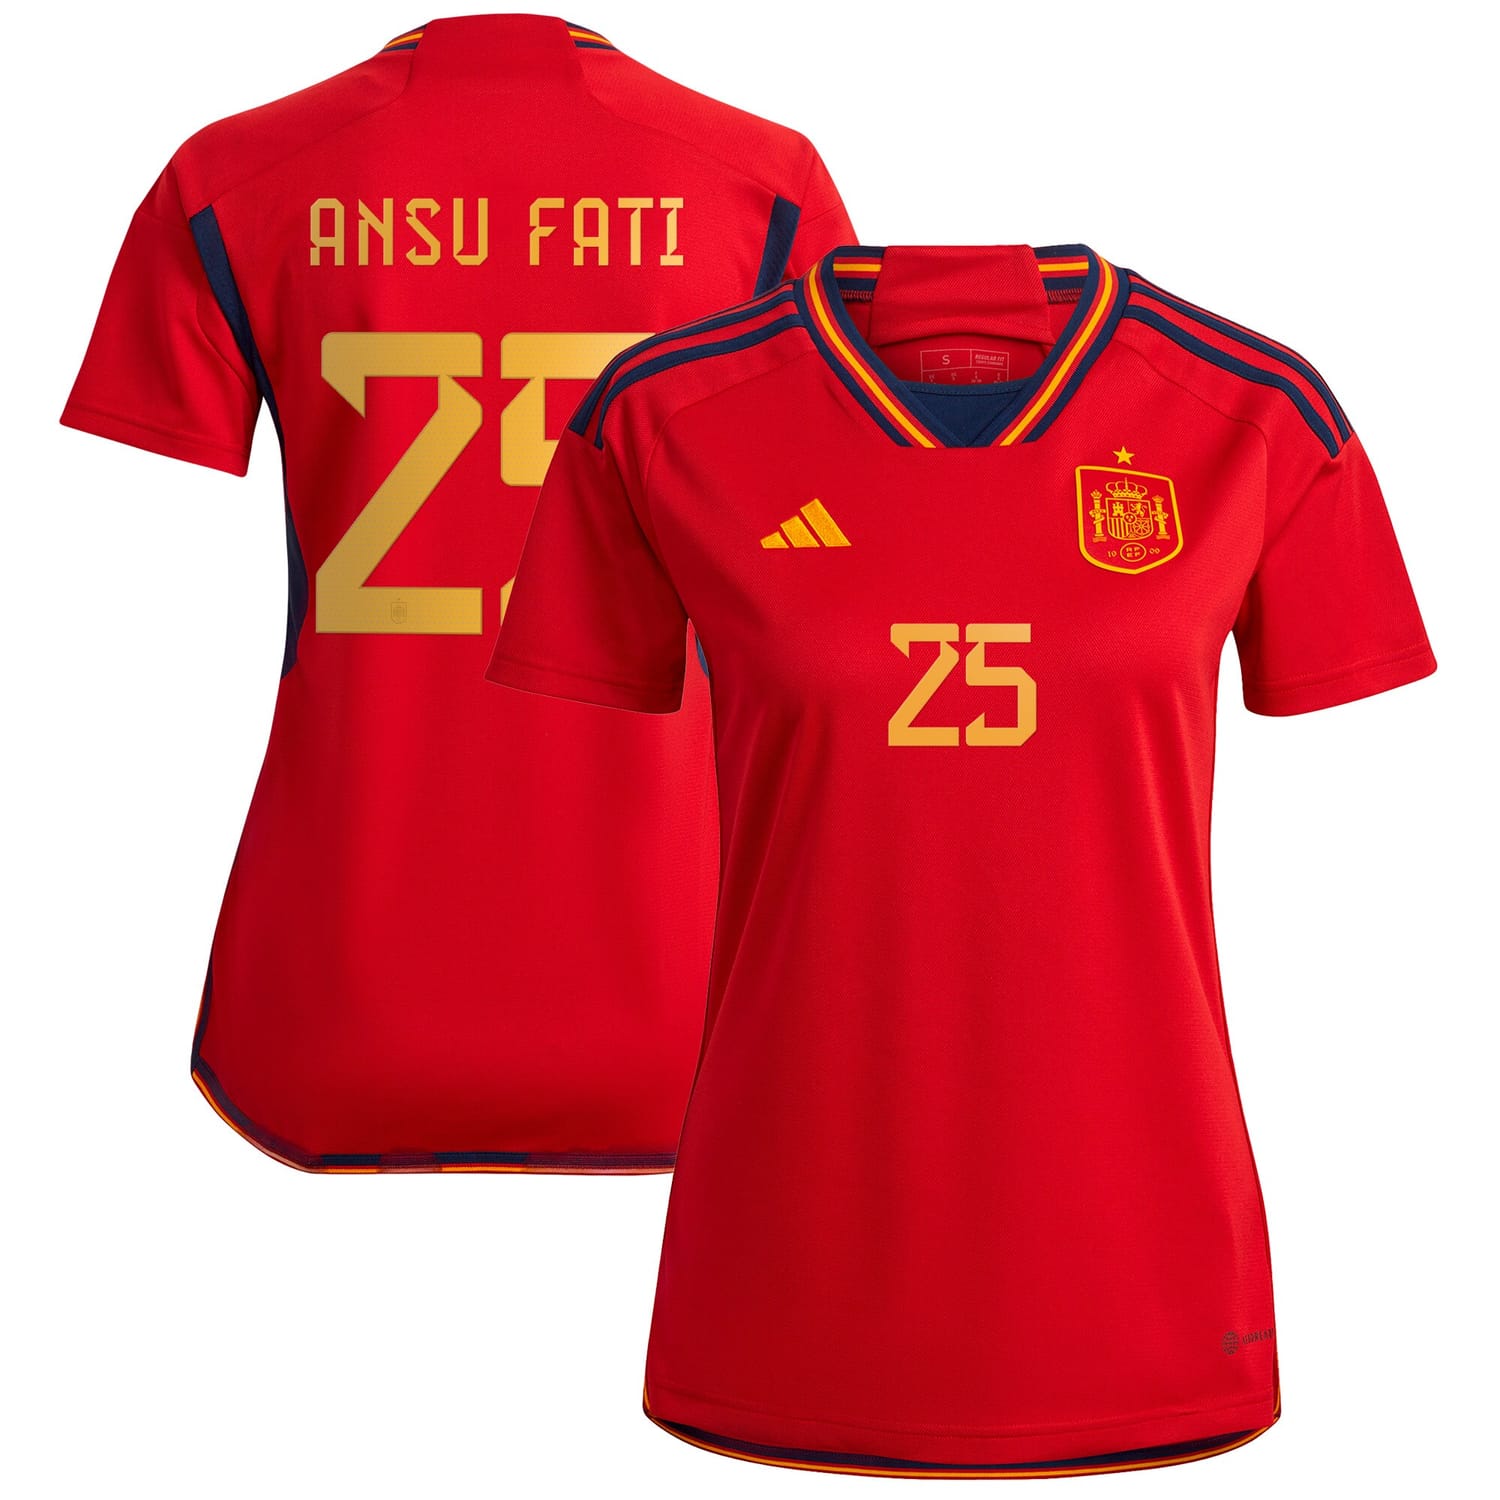 Spain National Team Home Jersey Shirt Red 2022-23 player Ansu Fati printing for Women